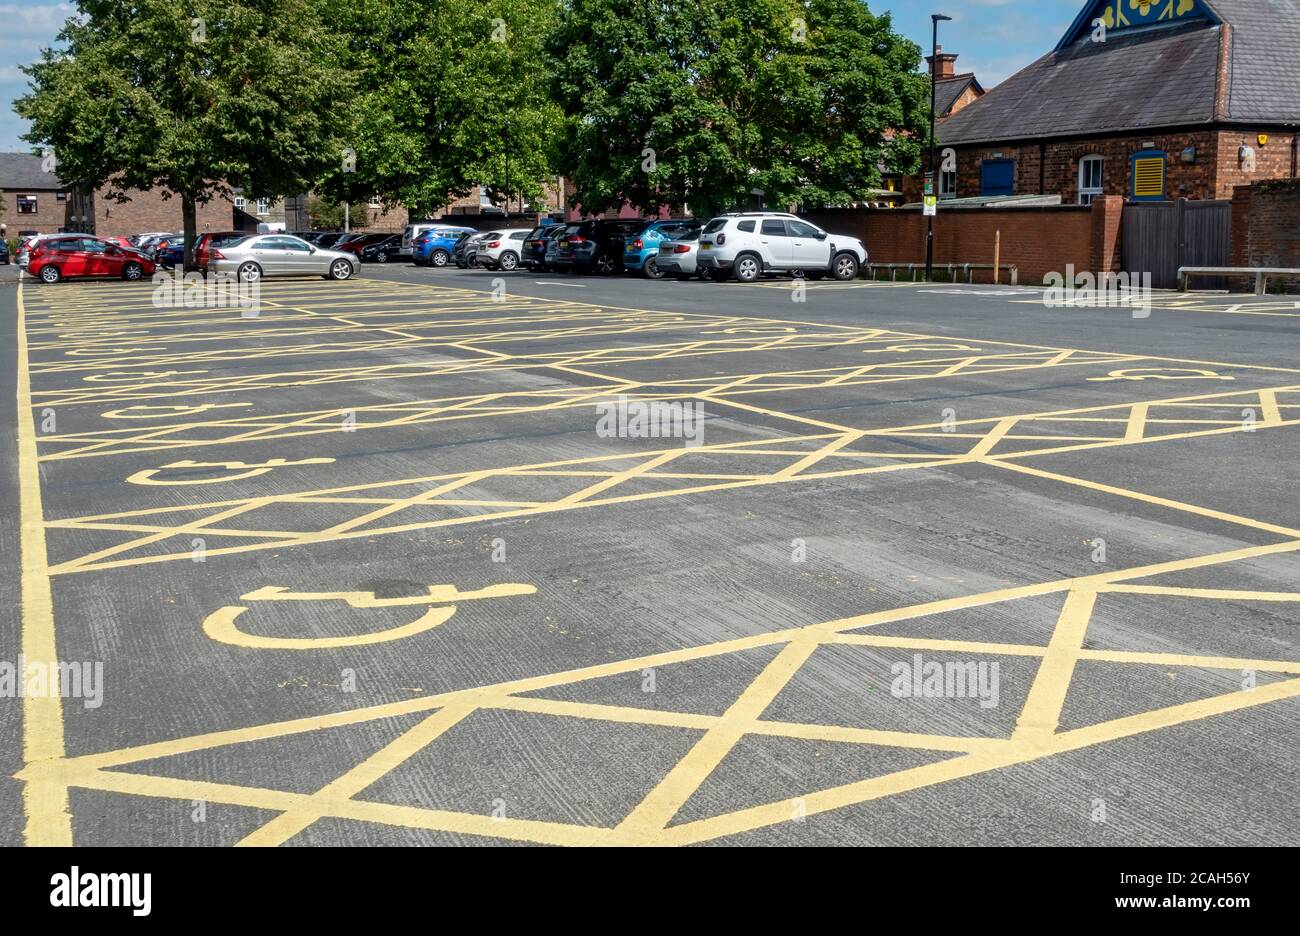 Disabled car parking space spaces in city town car park York North Yorkshire England UK United Kingdom GB Great Britain Stock Photo